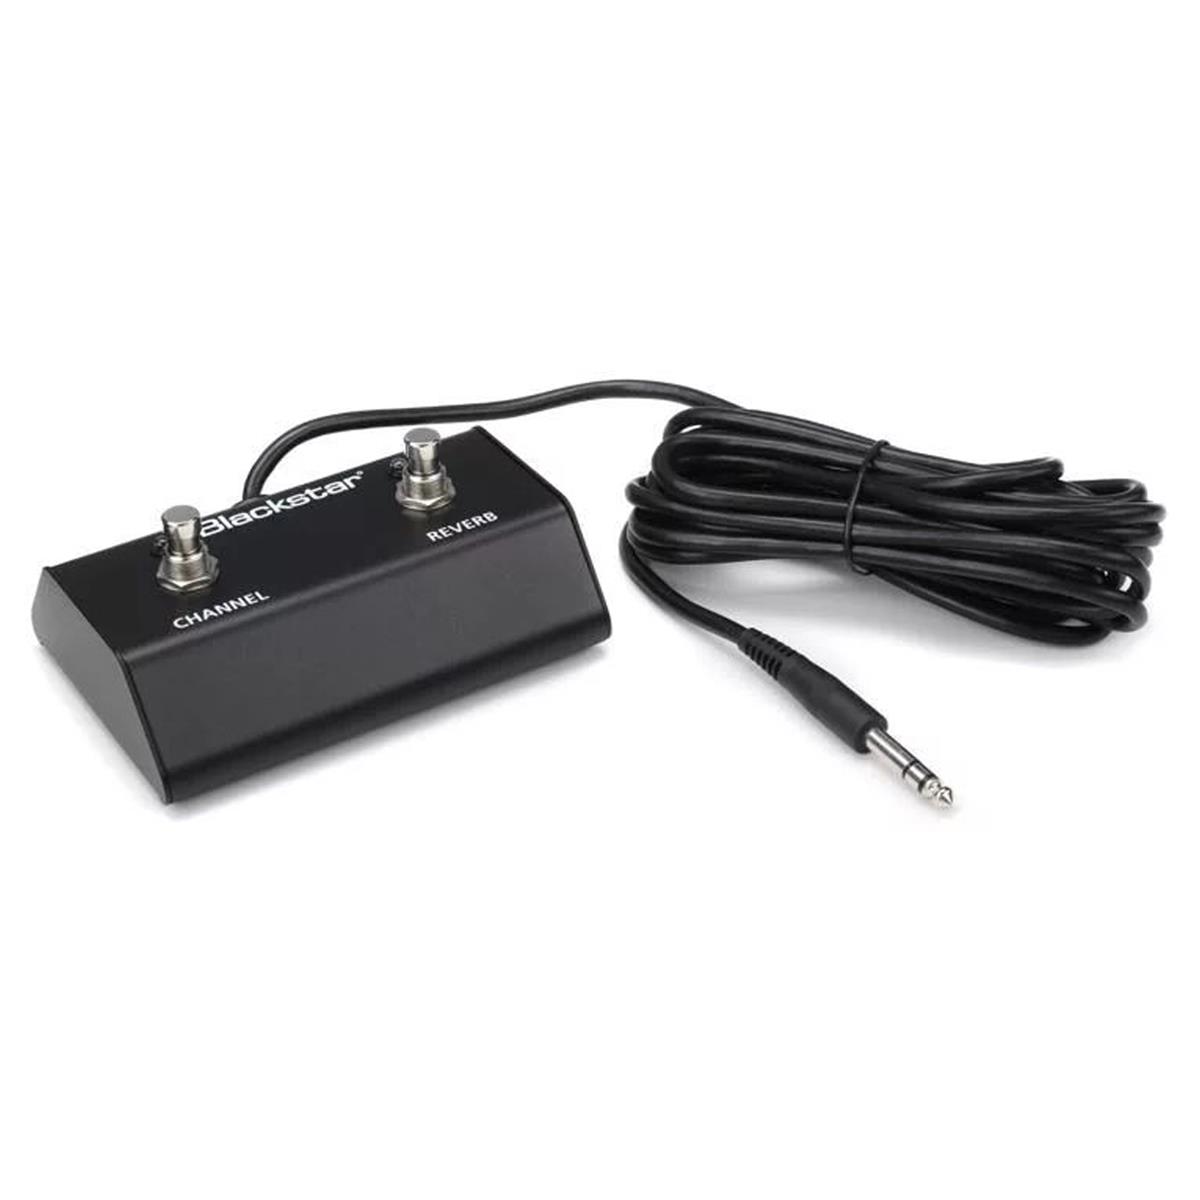 Image of Blackstar 2 Way Footswitch for HT CLUB 40 and HT CLUB50 Amplifier